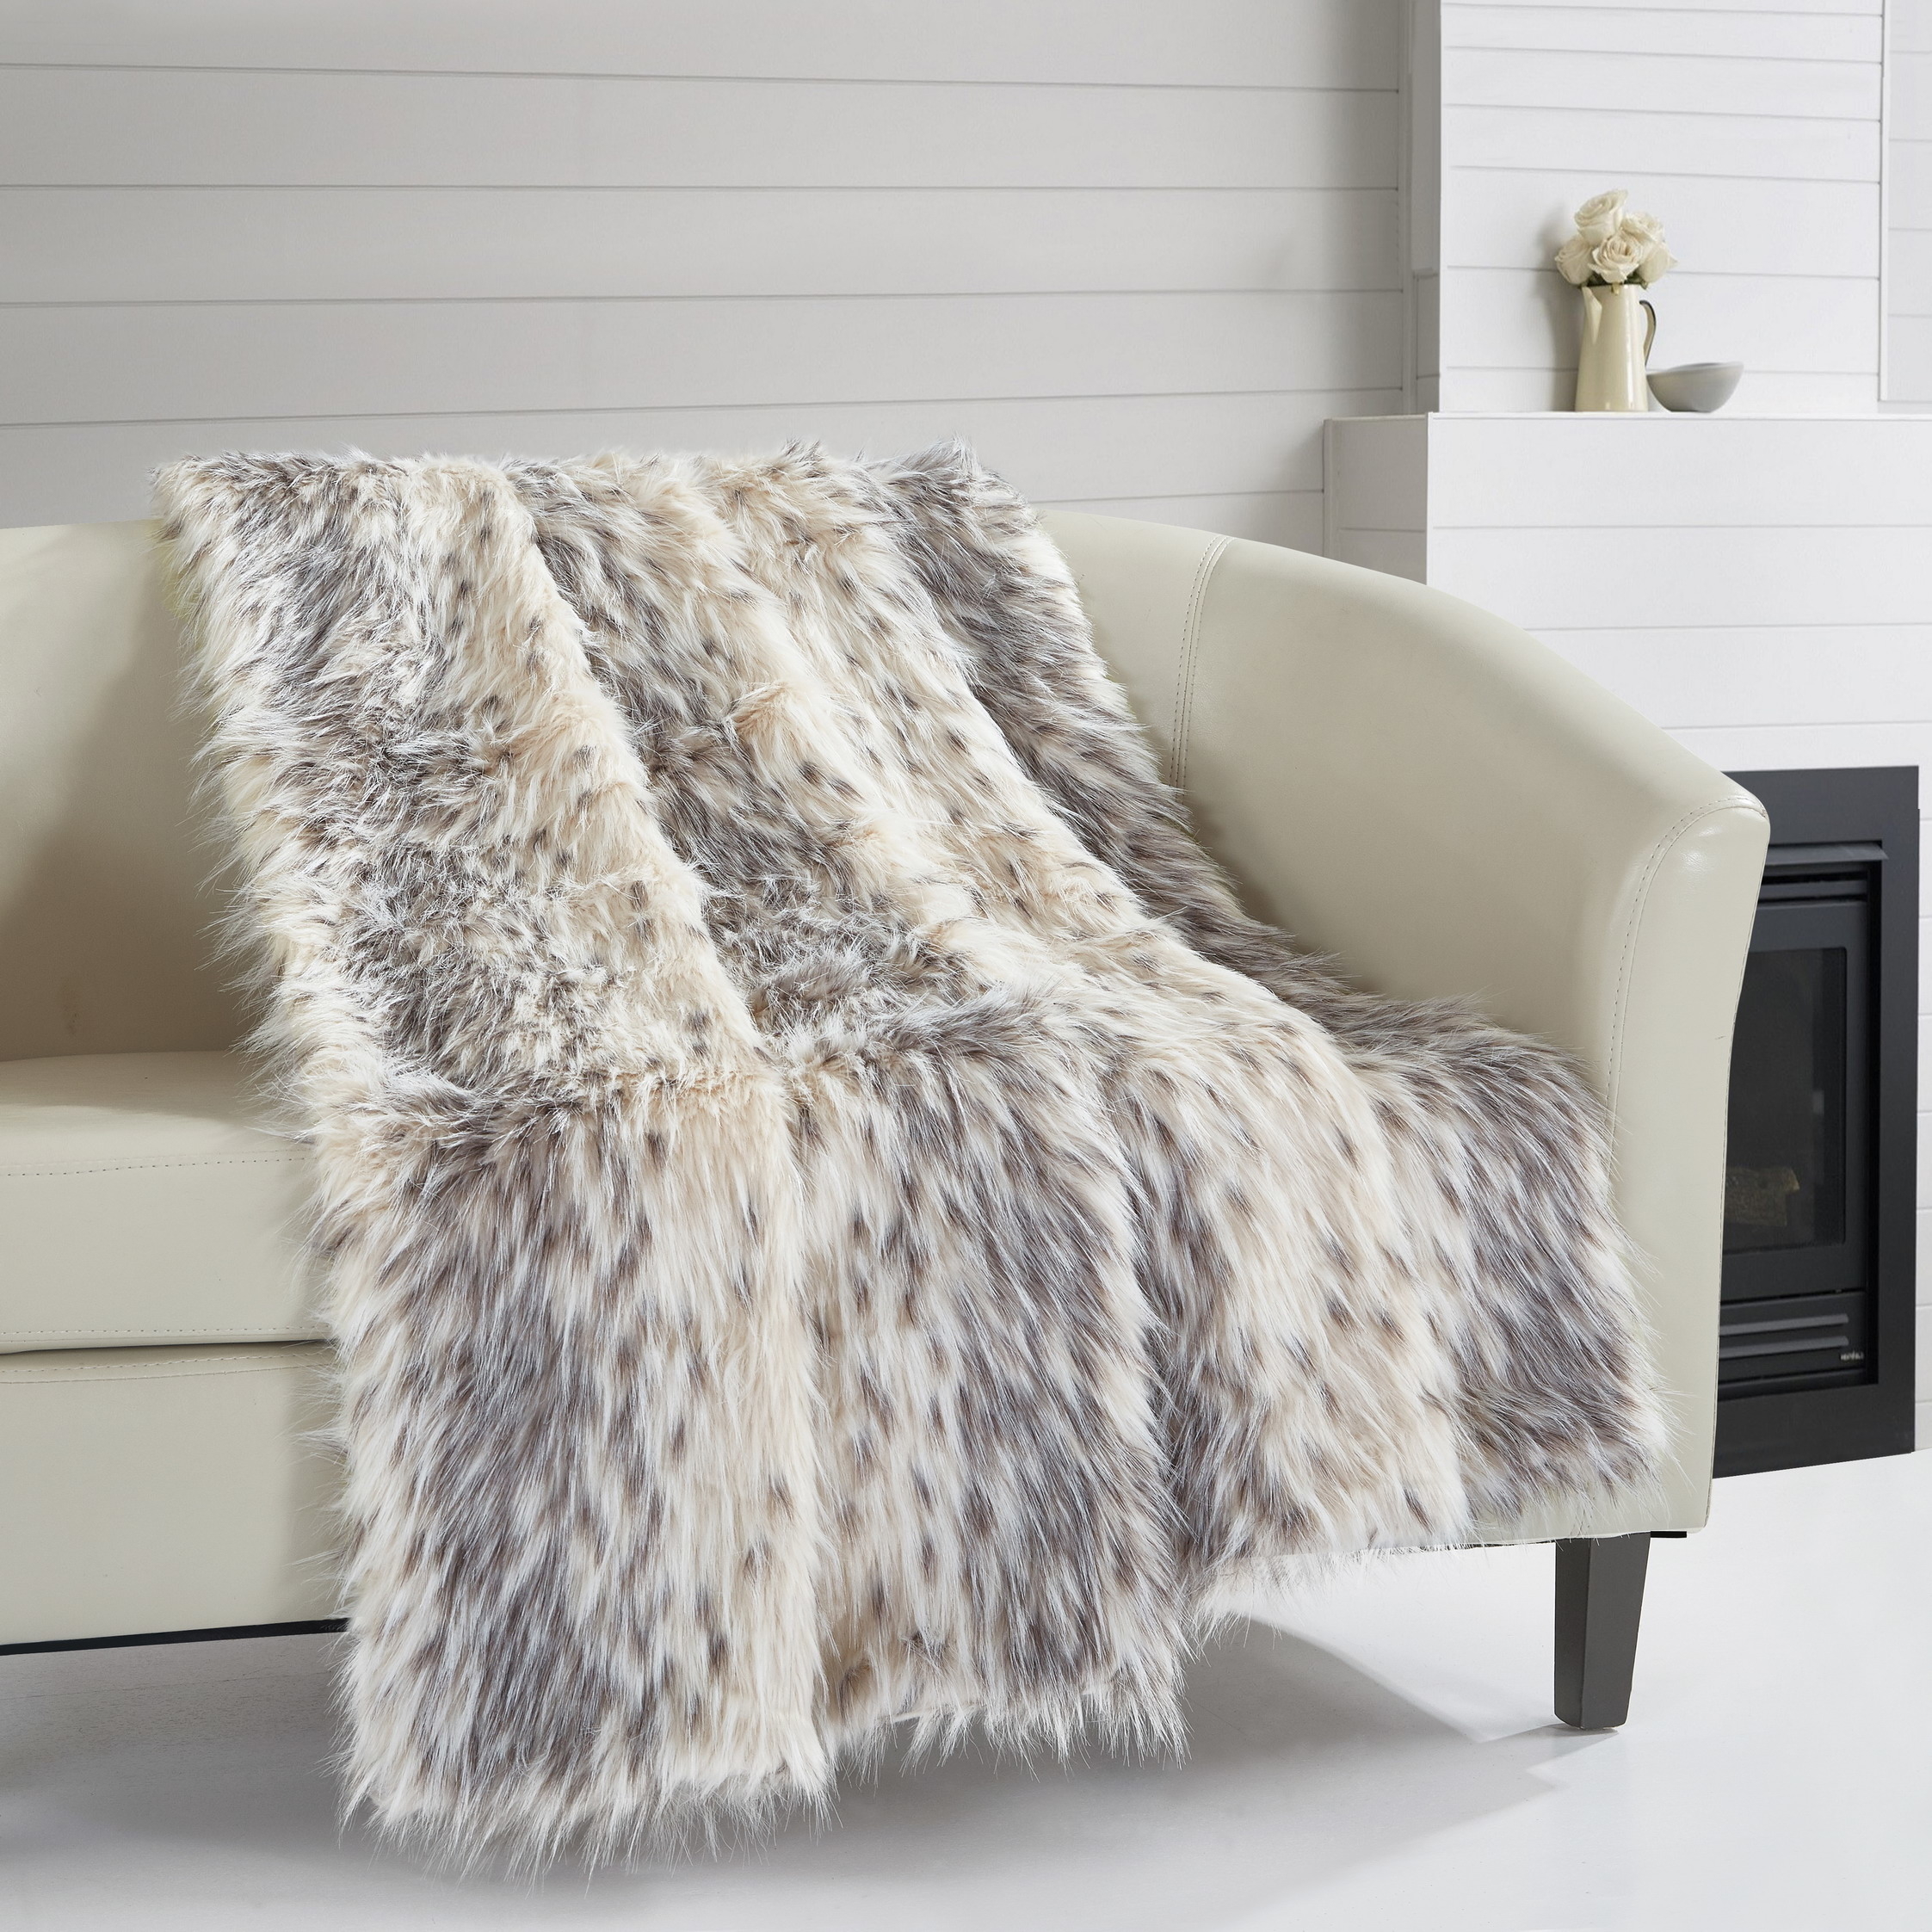 Piolo Throw Blanket Cozy Super Soft Ultra Plush Micromink Backing Decorative Two-Tone Design - Silver